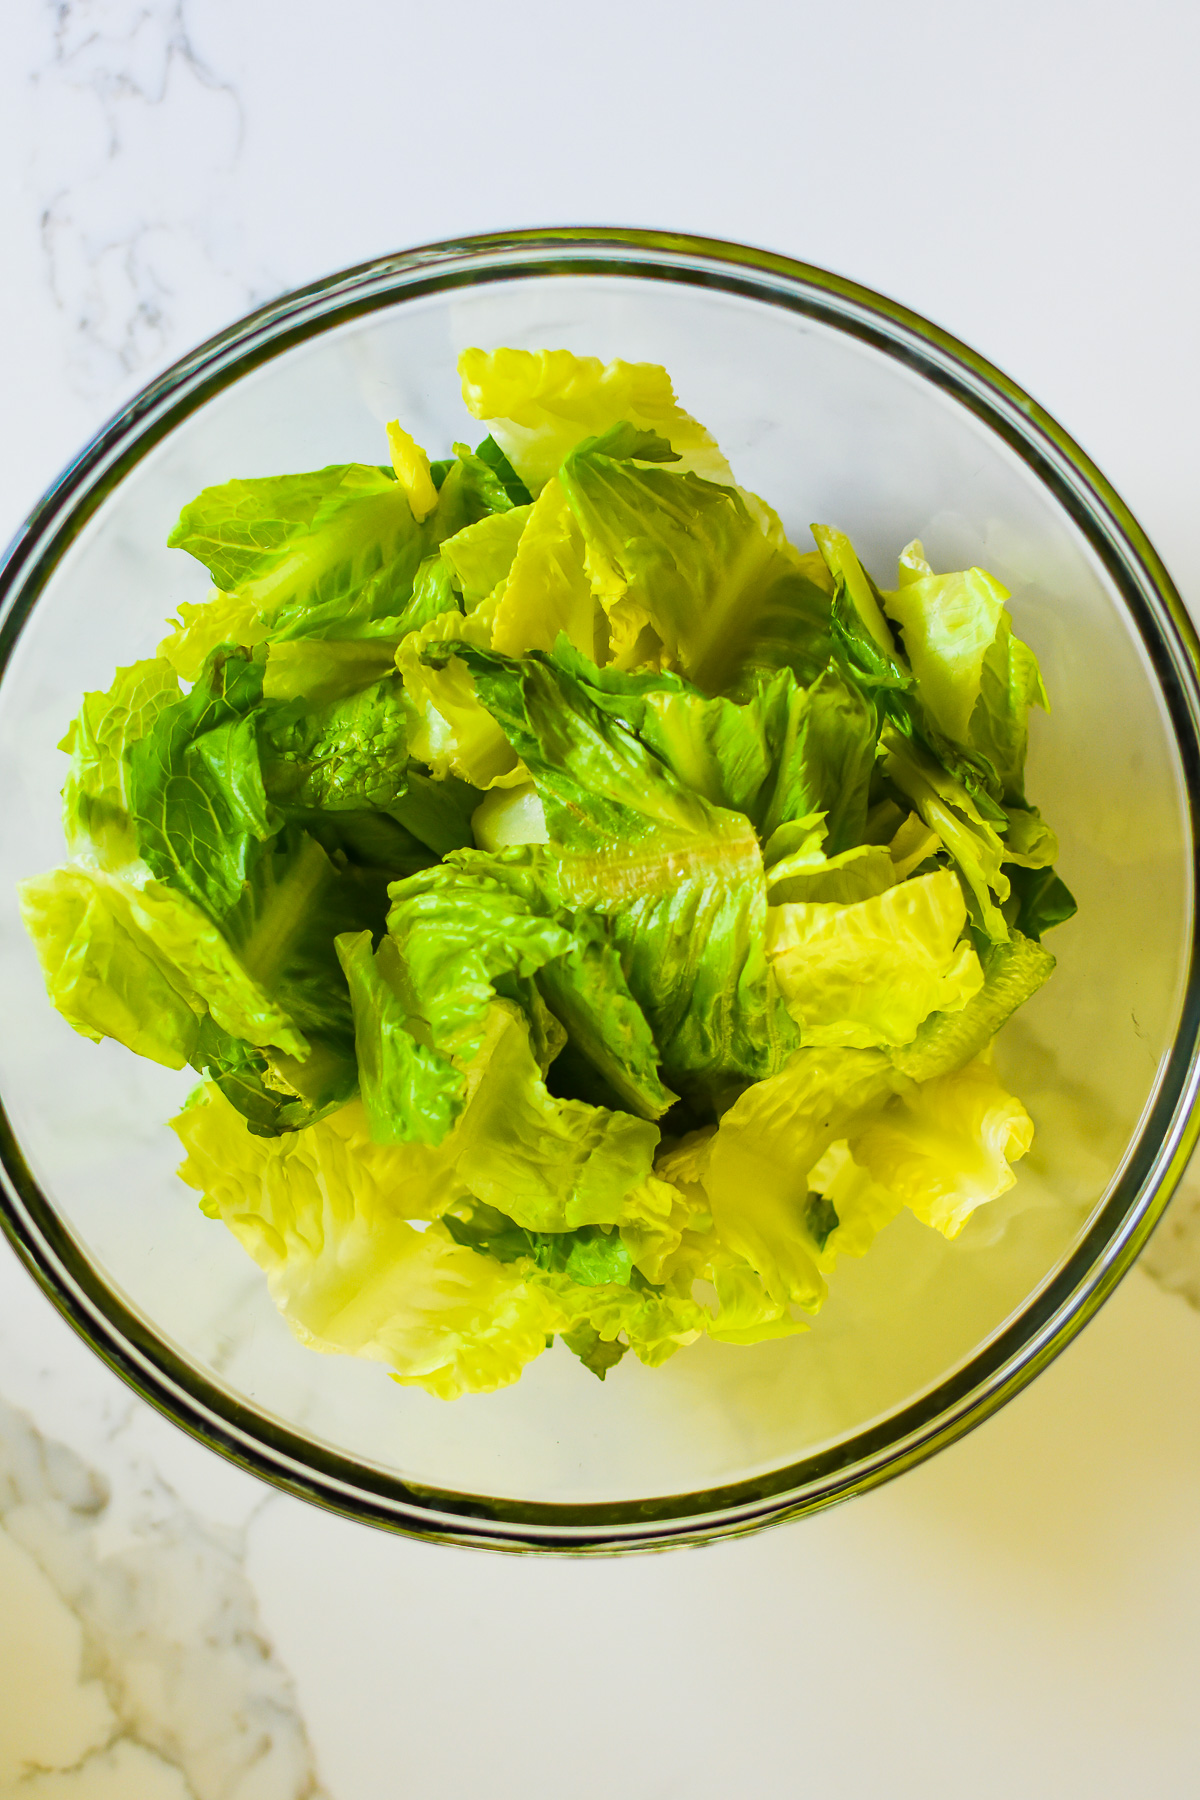 chopped and rinsed romaine lettuce leaves in glass mixing bowl.